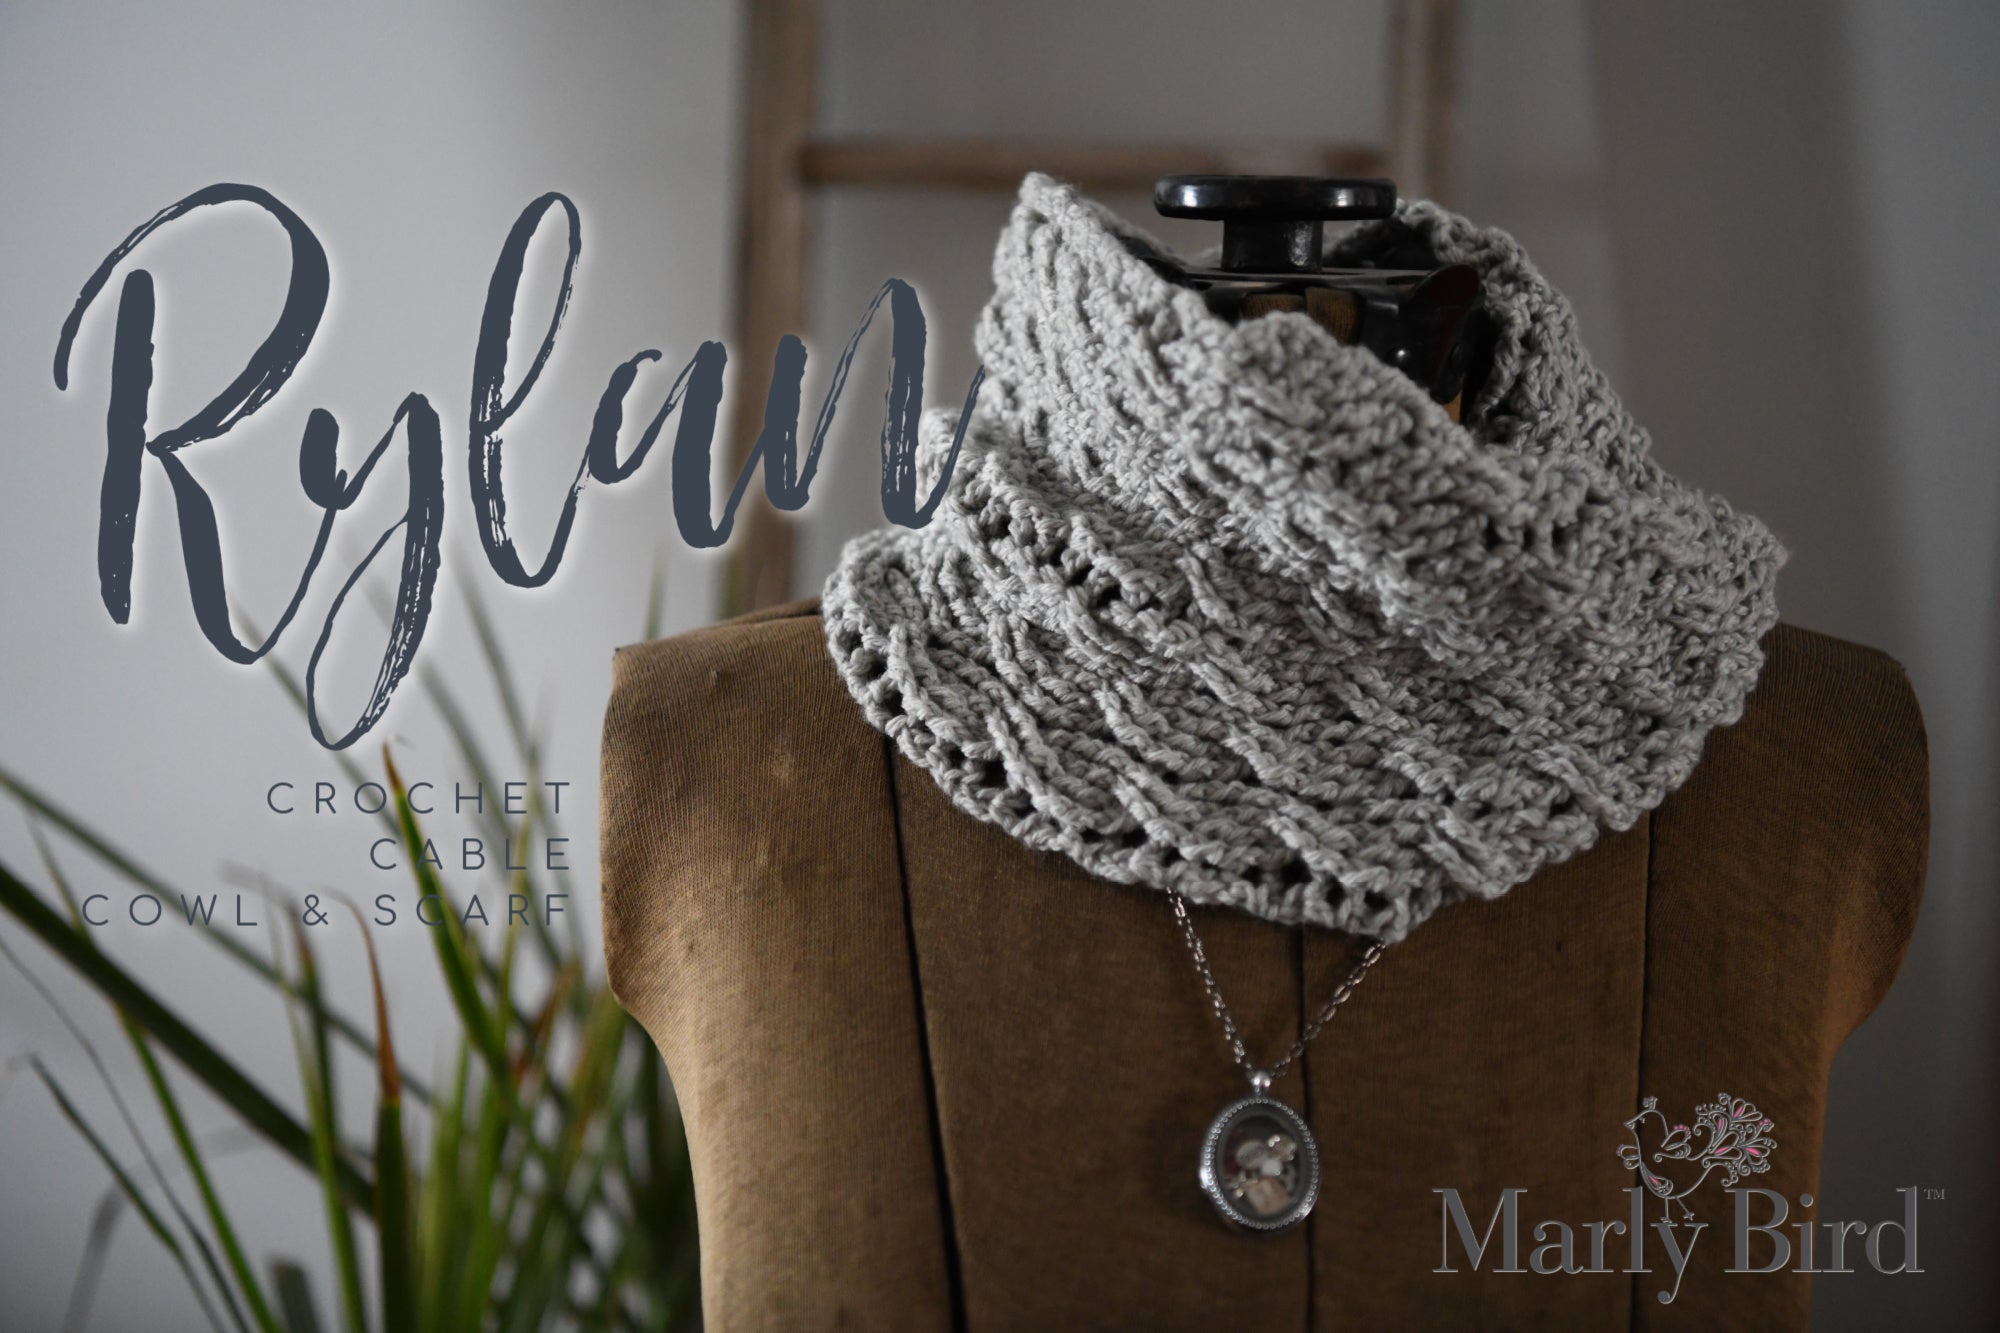 Rylan Crochet Cable Cowl & Scarf Pattern